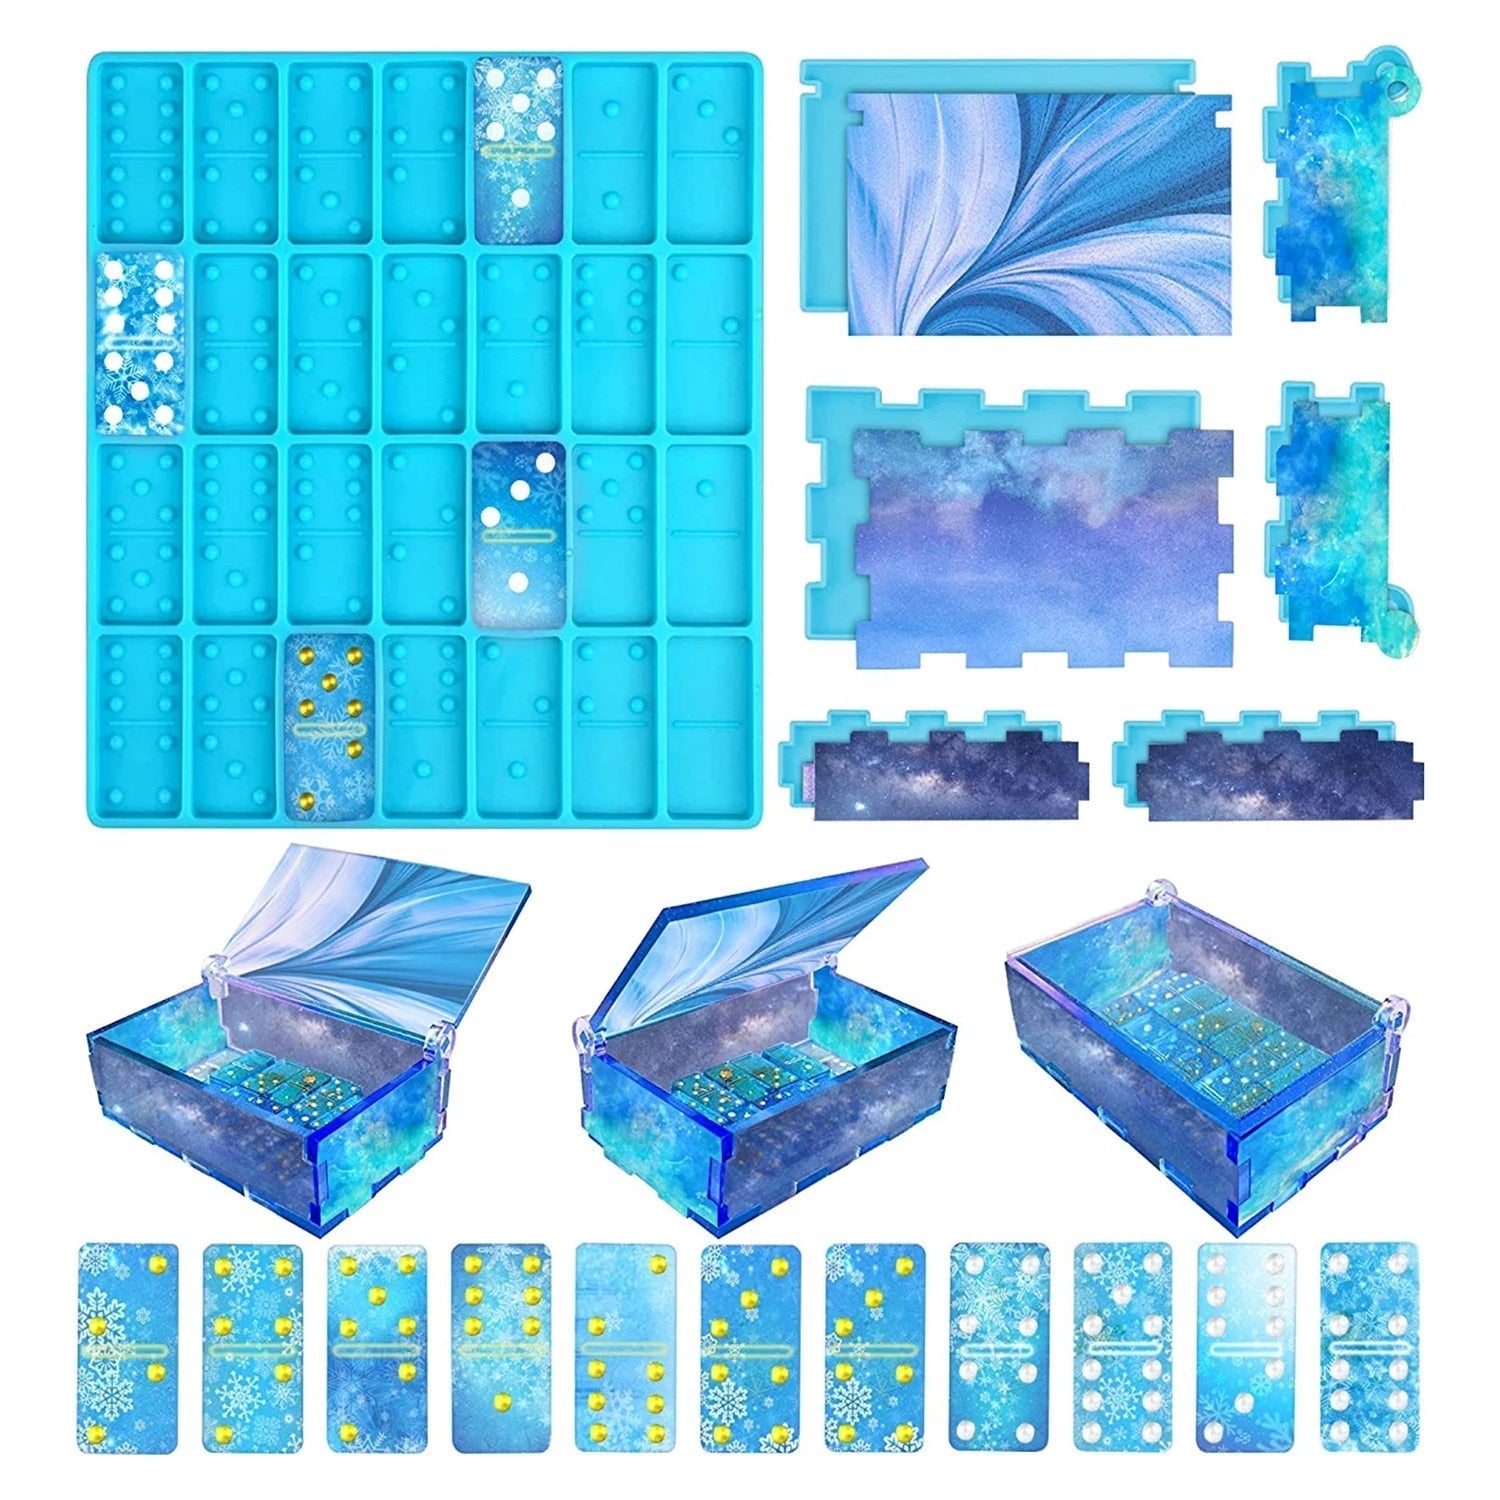 Epoxy Resin Silicone Molds Game Domino Storage Box Mould Casting Making  Craft